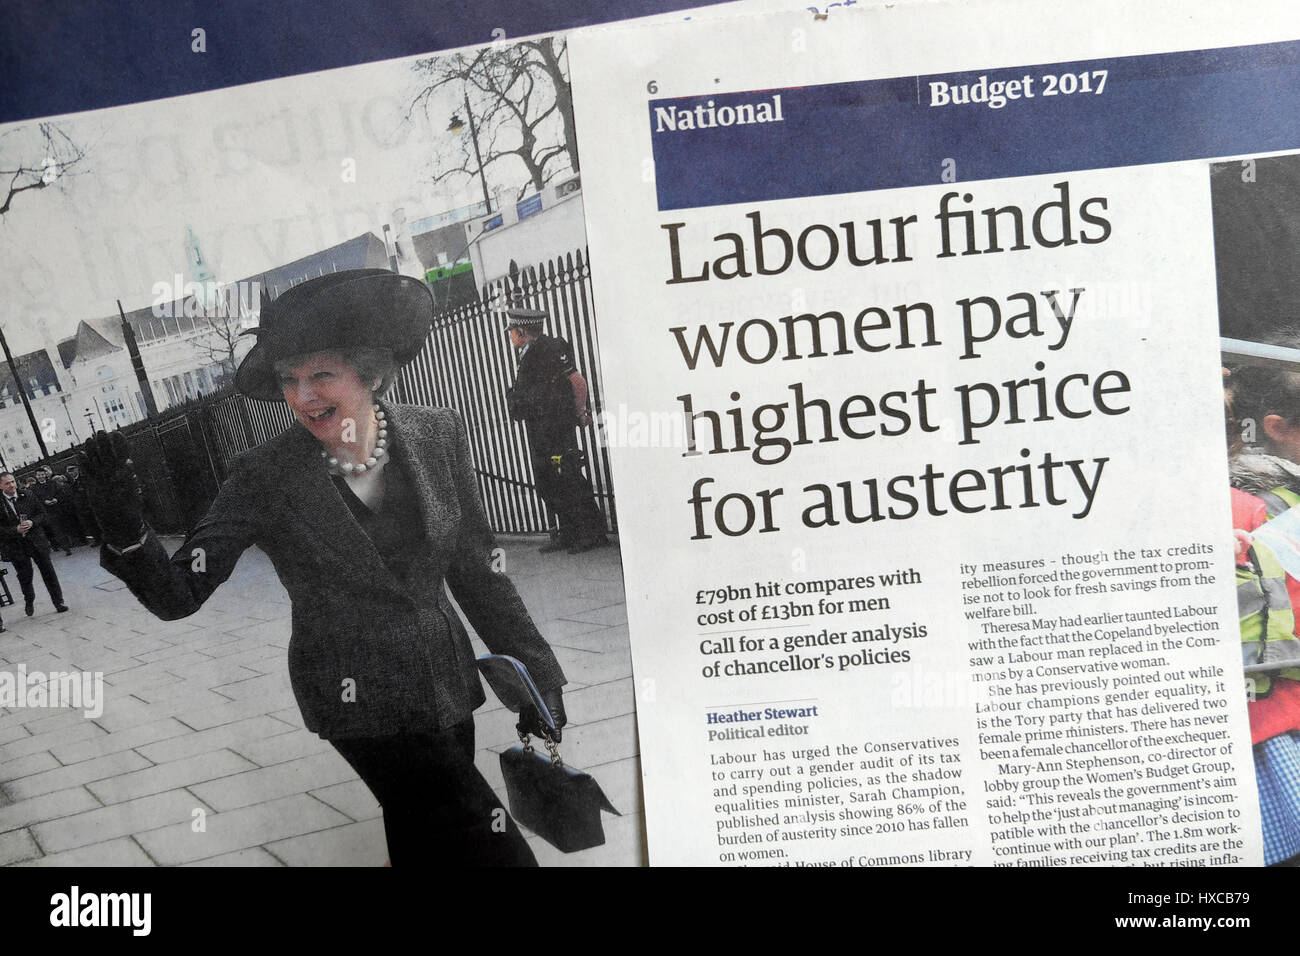 'Labour finds women pay highest price for austerity' Guardian newspaper article Budget 2017 headline London England UK Stock Photo